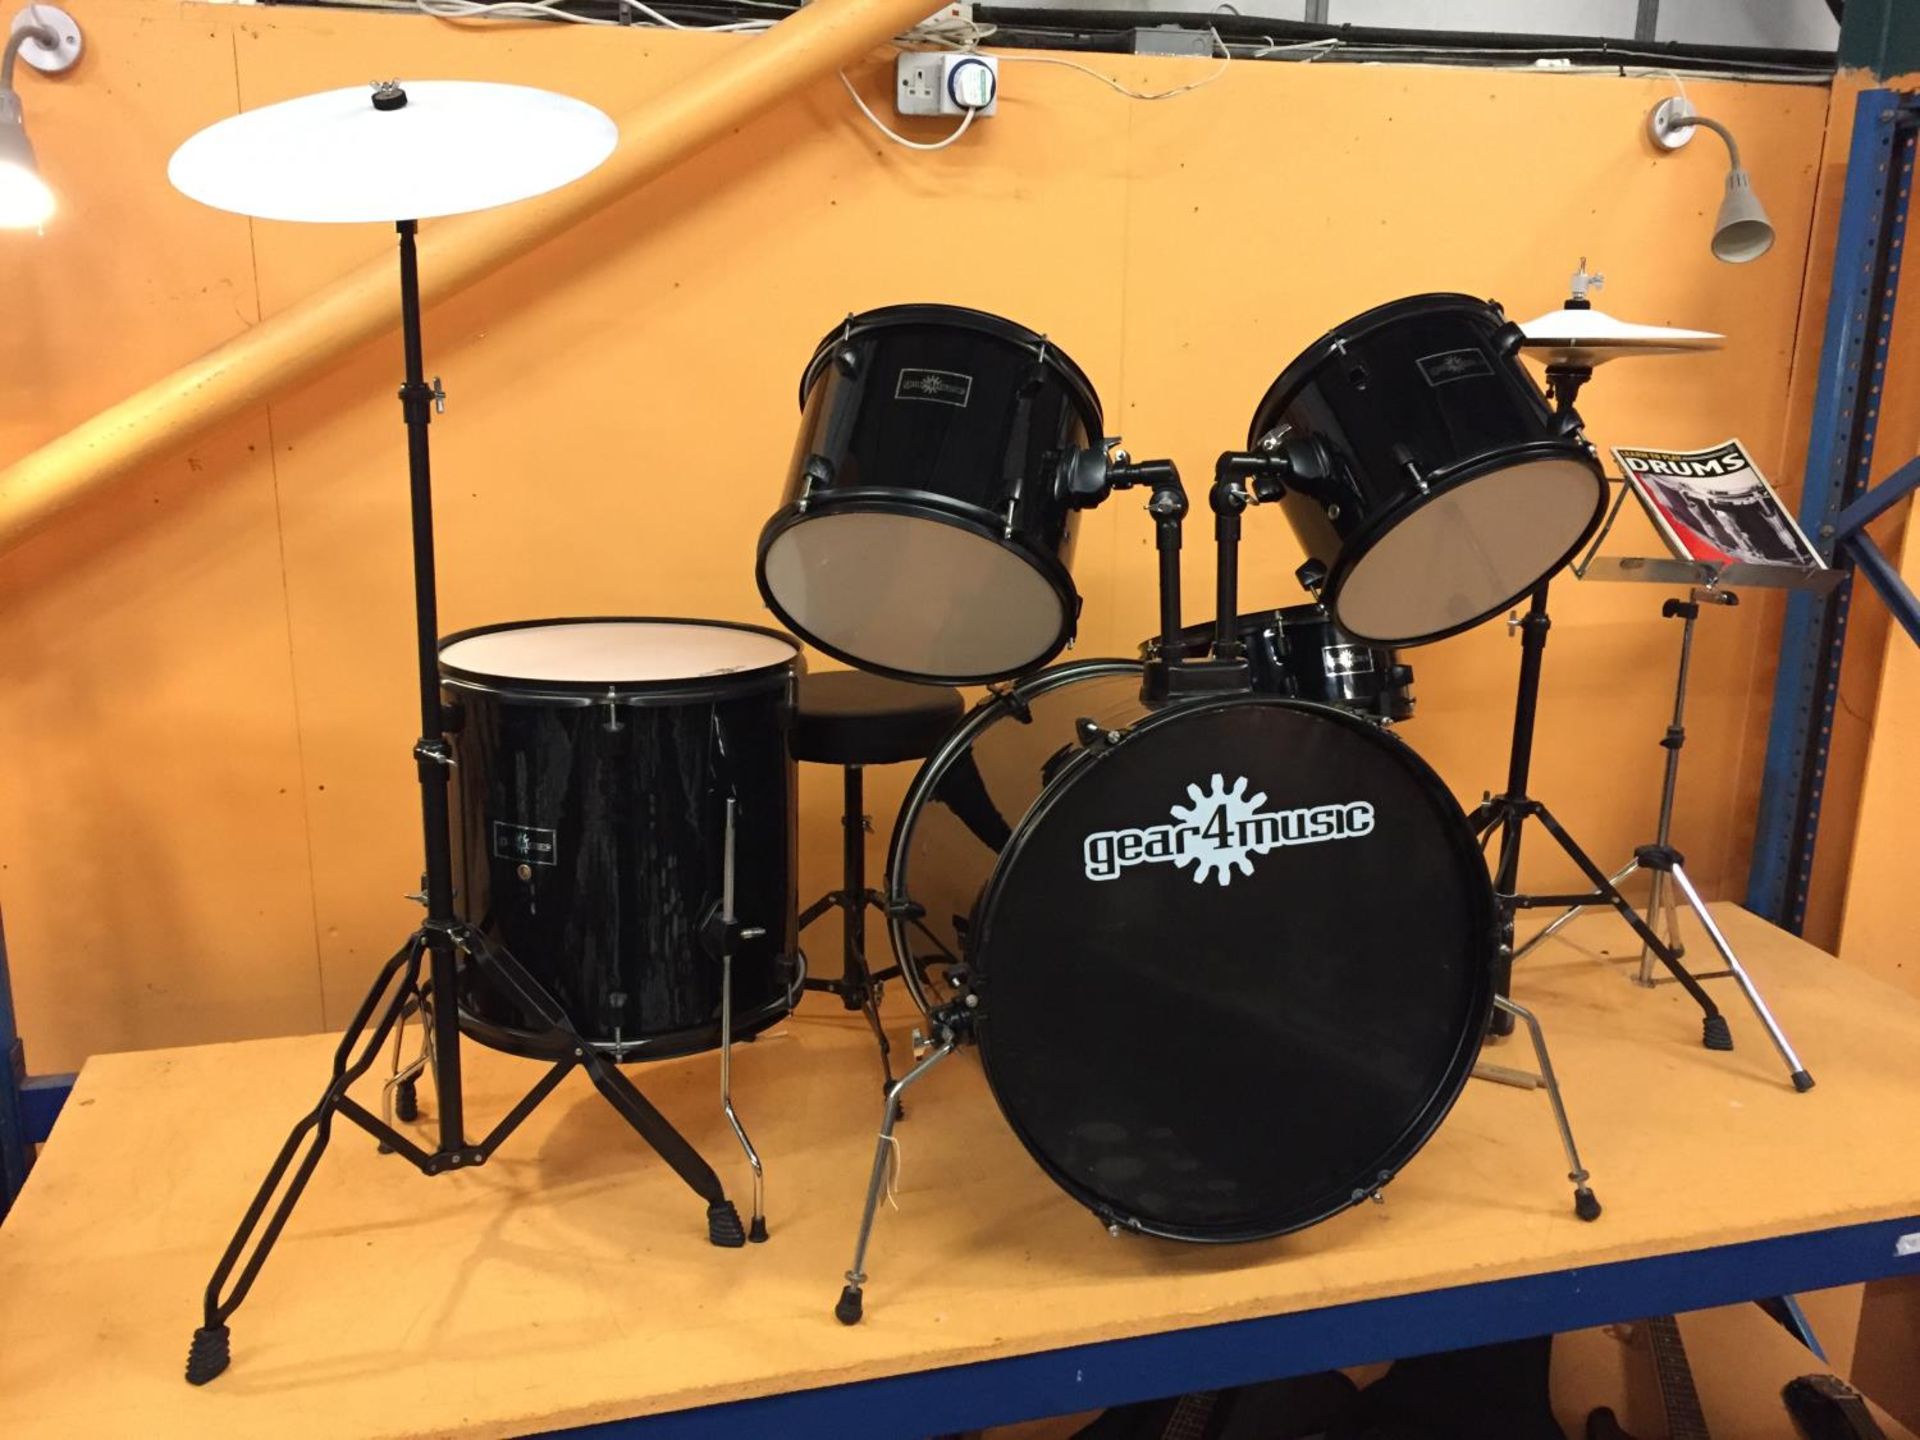 A BLACK GEAR FOR MUSIC DRUM KIT WITH MUSIC AND MUSIC STAND